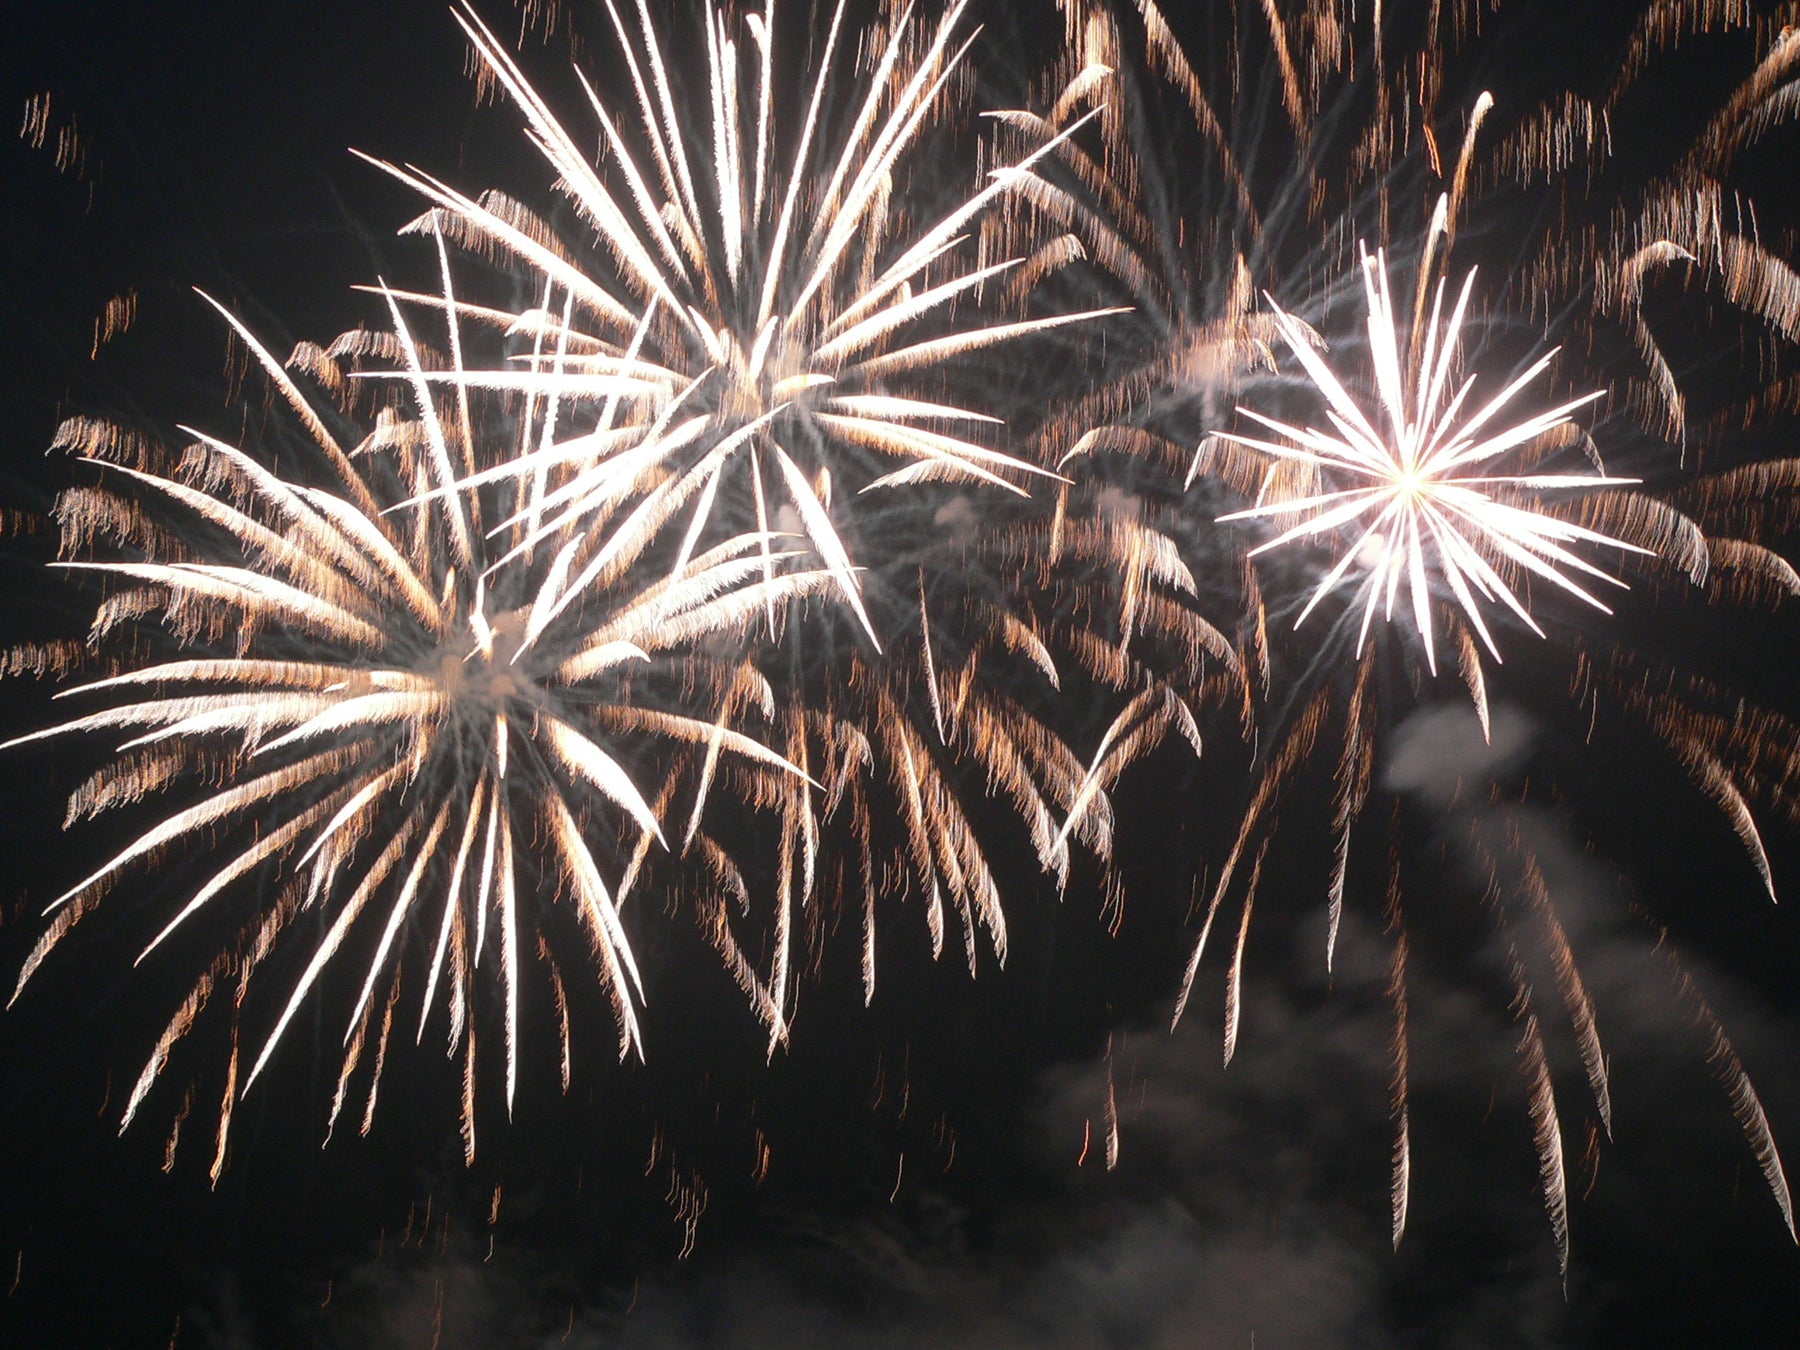 SOUTHEND’S FIREWORK DISPLAY IS TO MAKE A COMEBACK THIS YEAR!